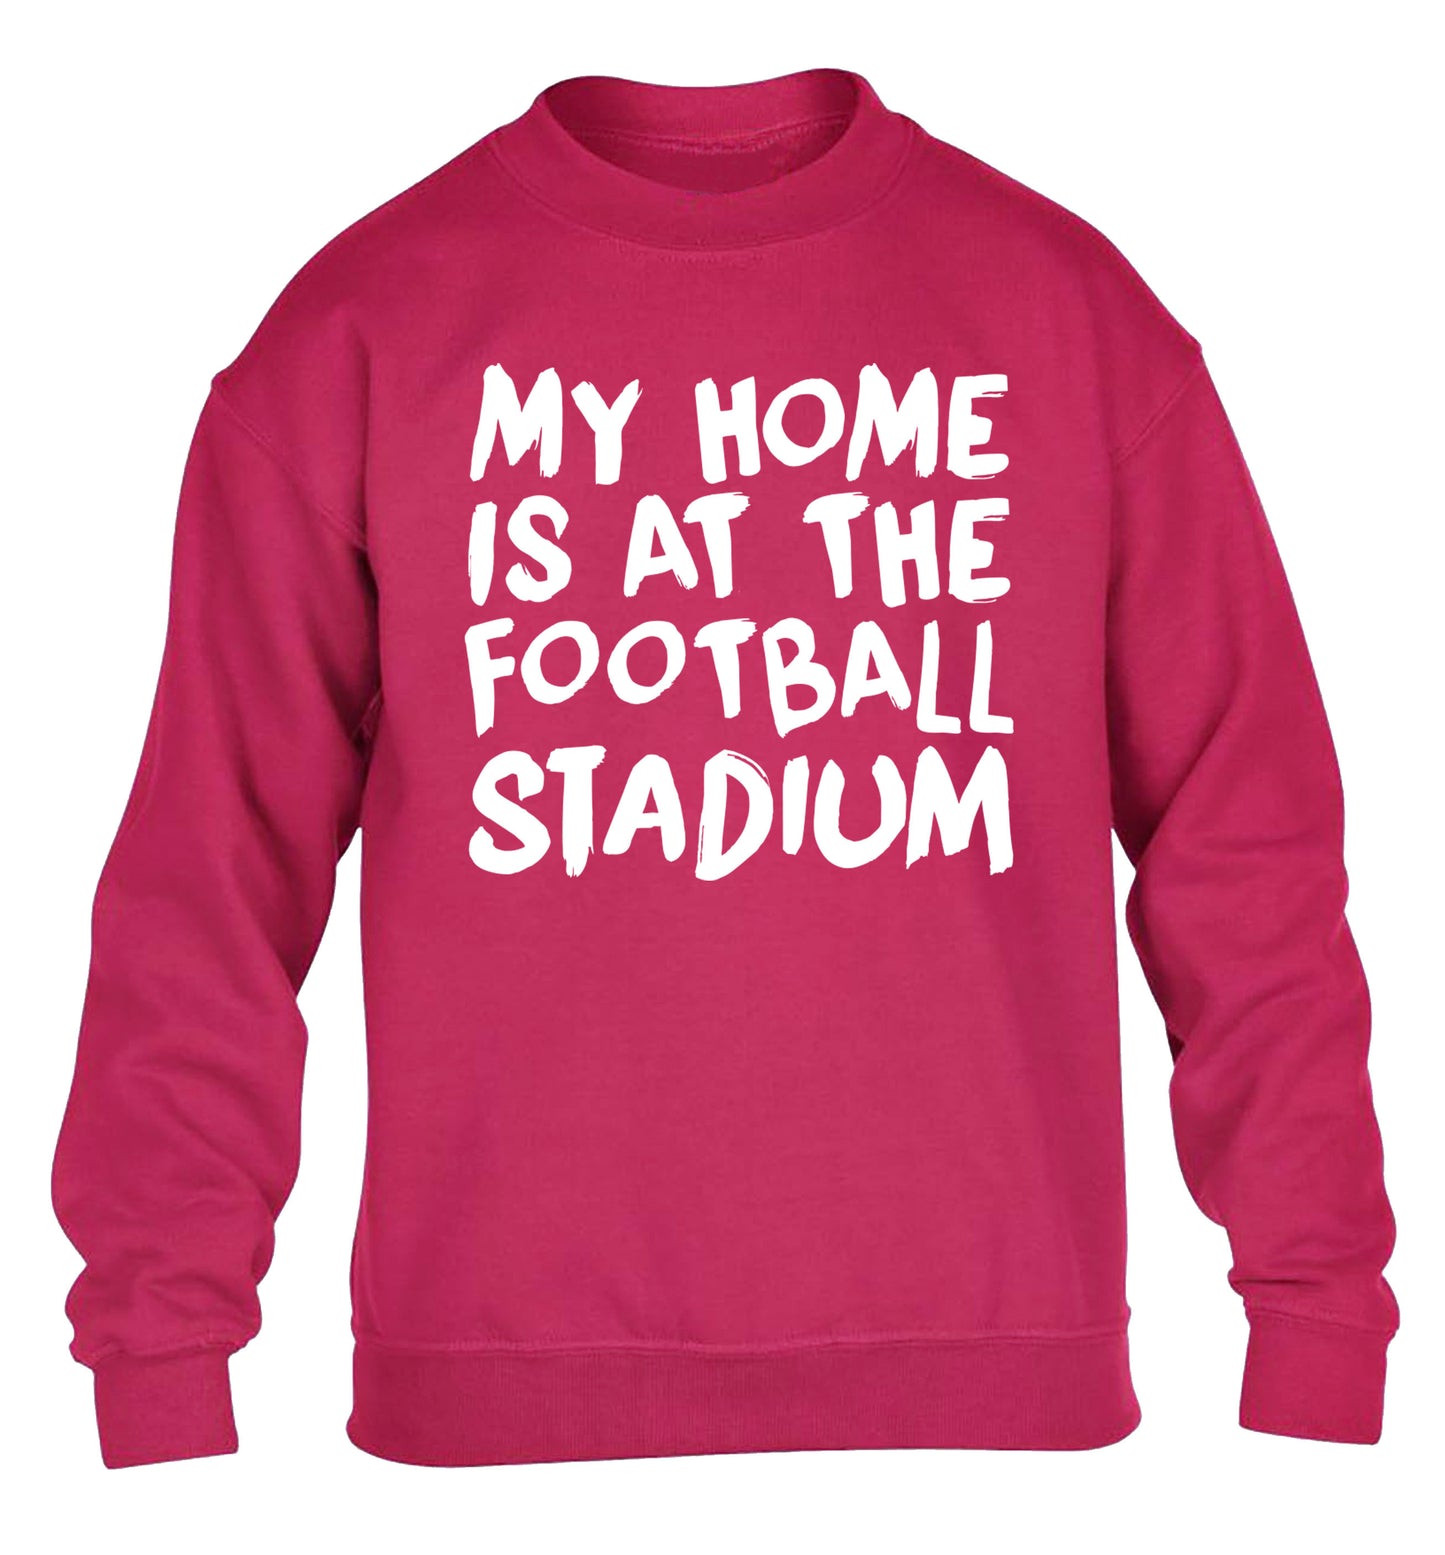 My home is at the football stadium children's pink sweater 12-14 Years